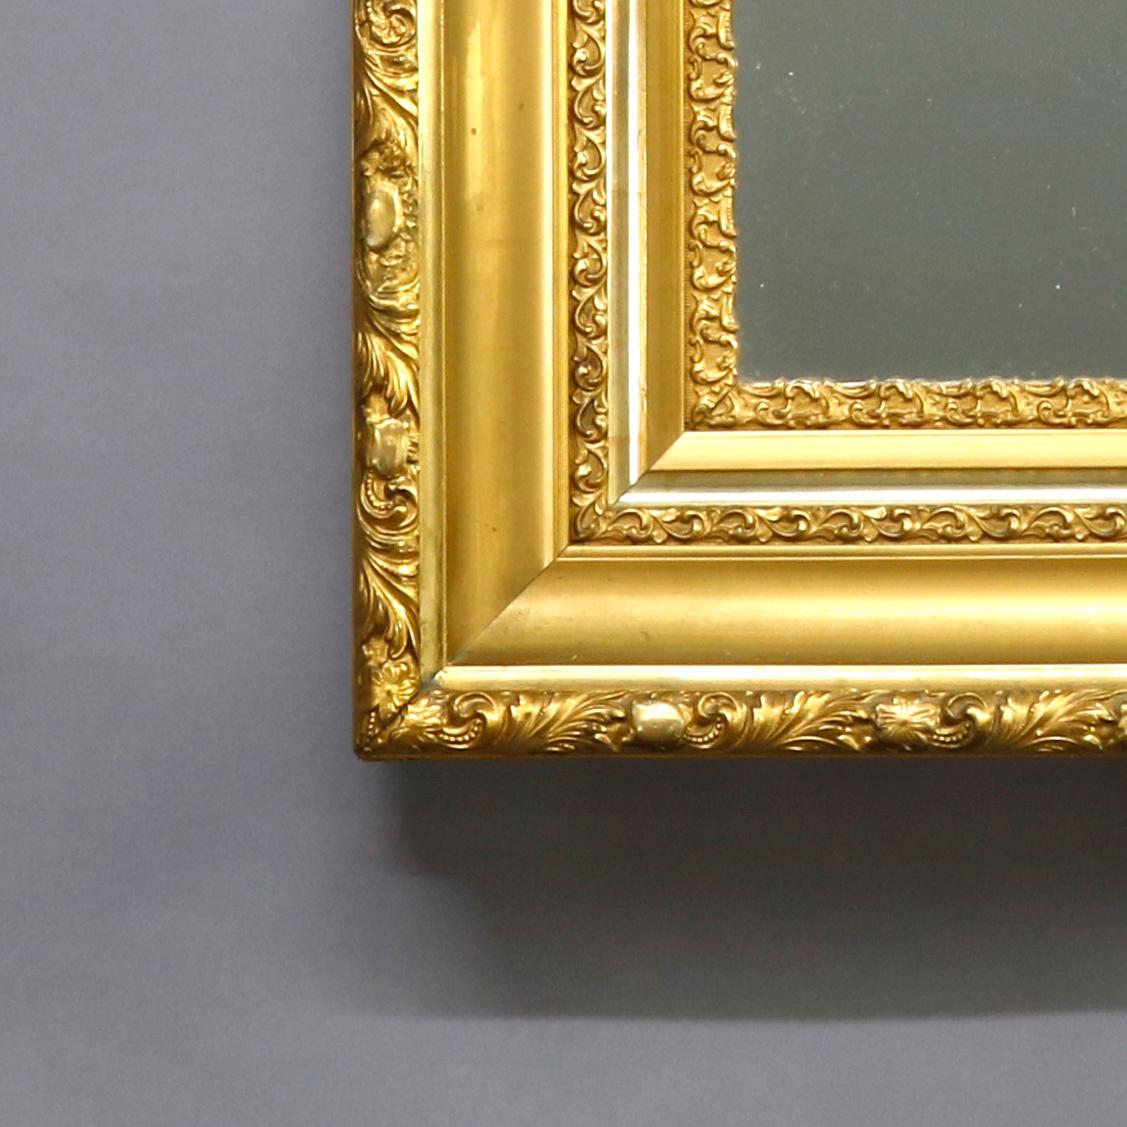 An antique Victorian wall mirror offers classical foliate decorated gold giltwood frame, circa 1890

Measures: 26.25